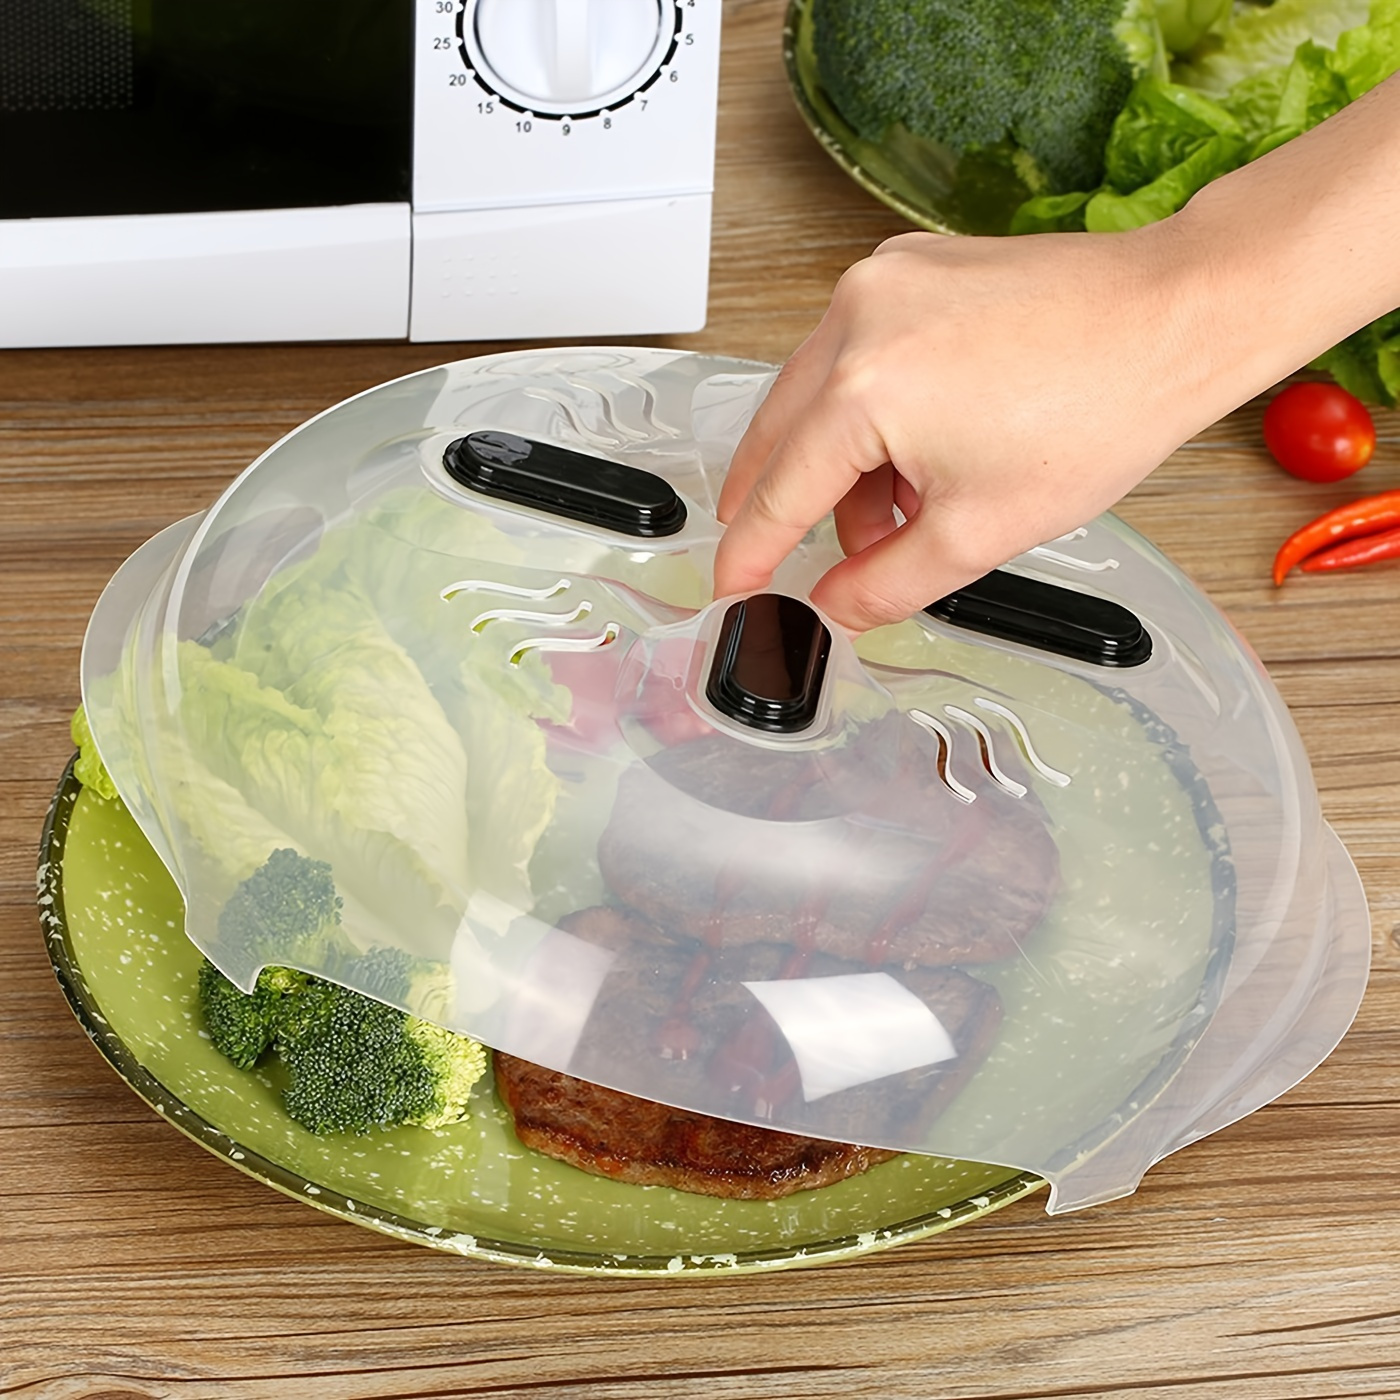 Magnetic Microwave Plate Cover Splatter Guard with Steam Food Cover Stove  Cover Transparent Anti-Splash Cap Kichen Accessories